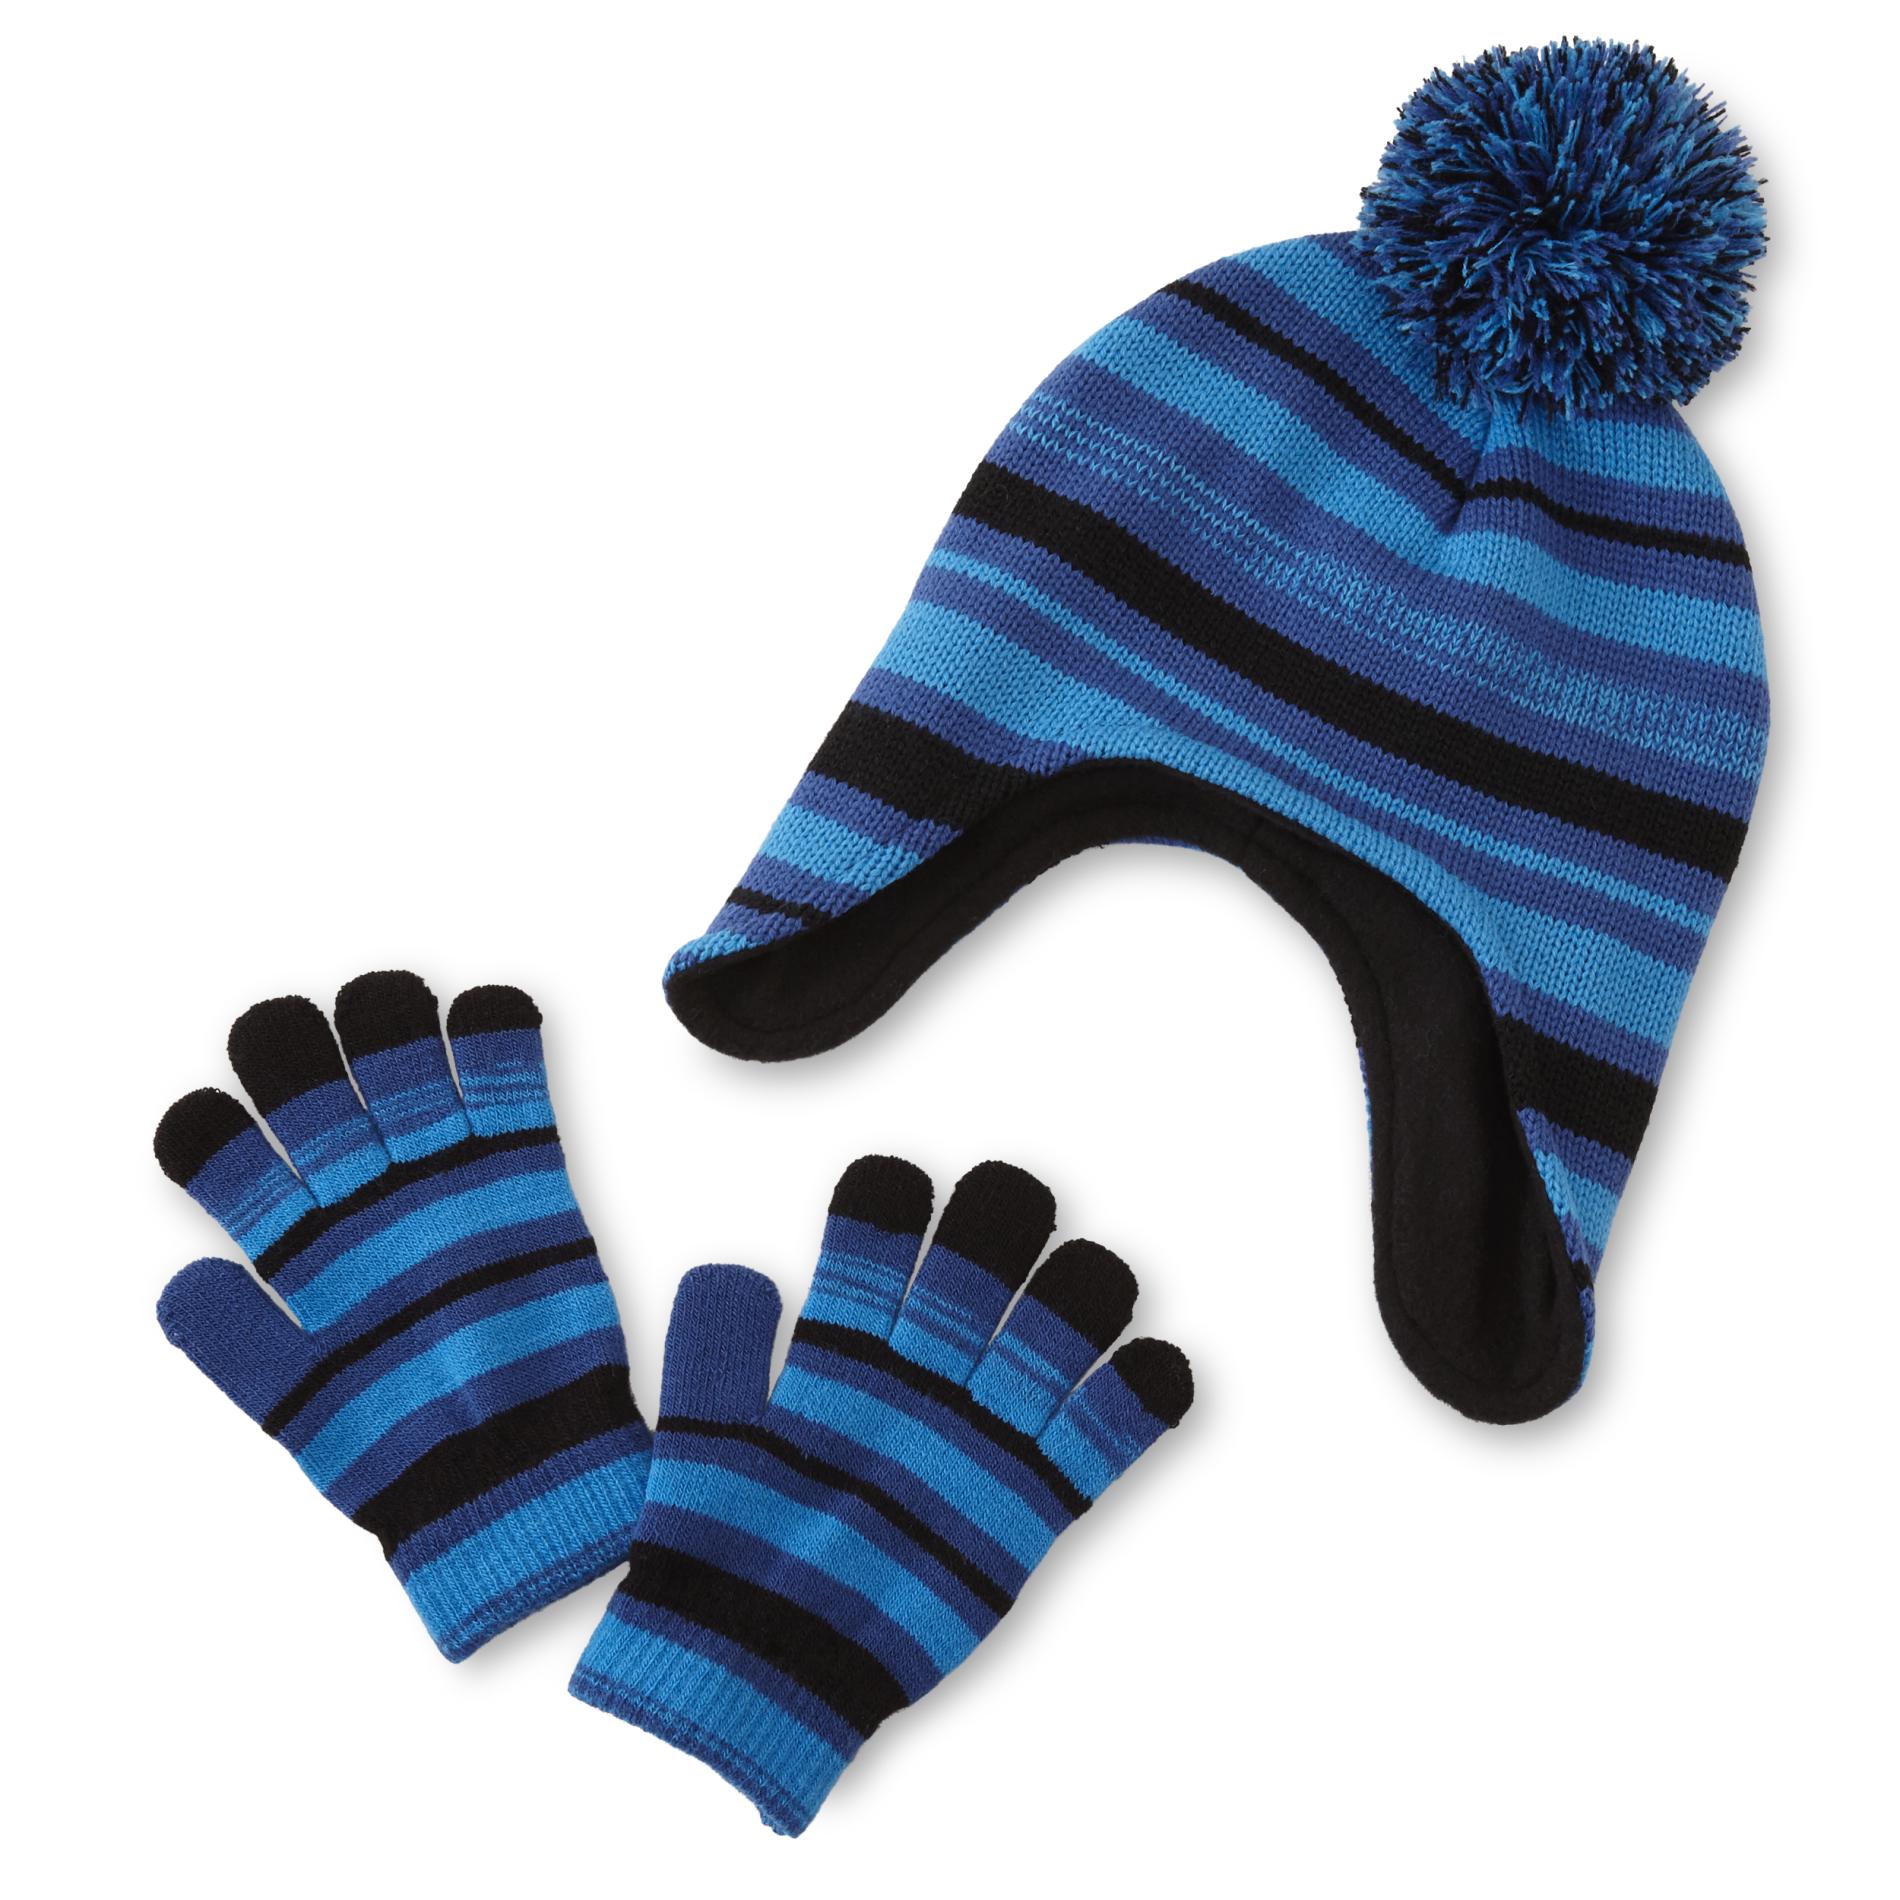 Basic Editions Boys' Winter Hat & Gloves - Striped